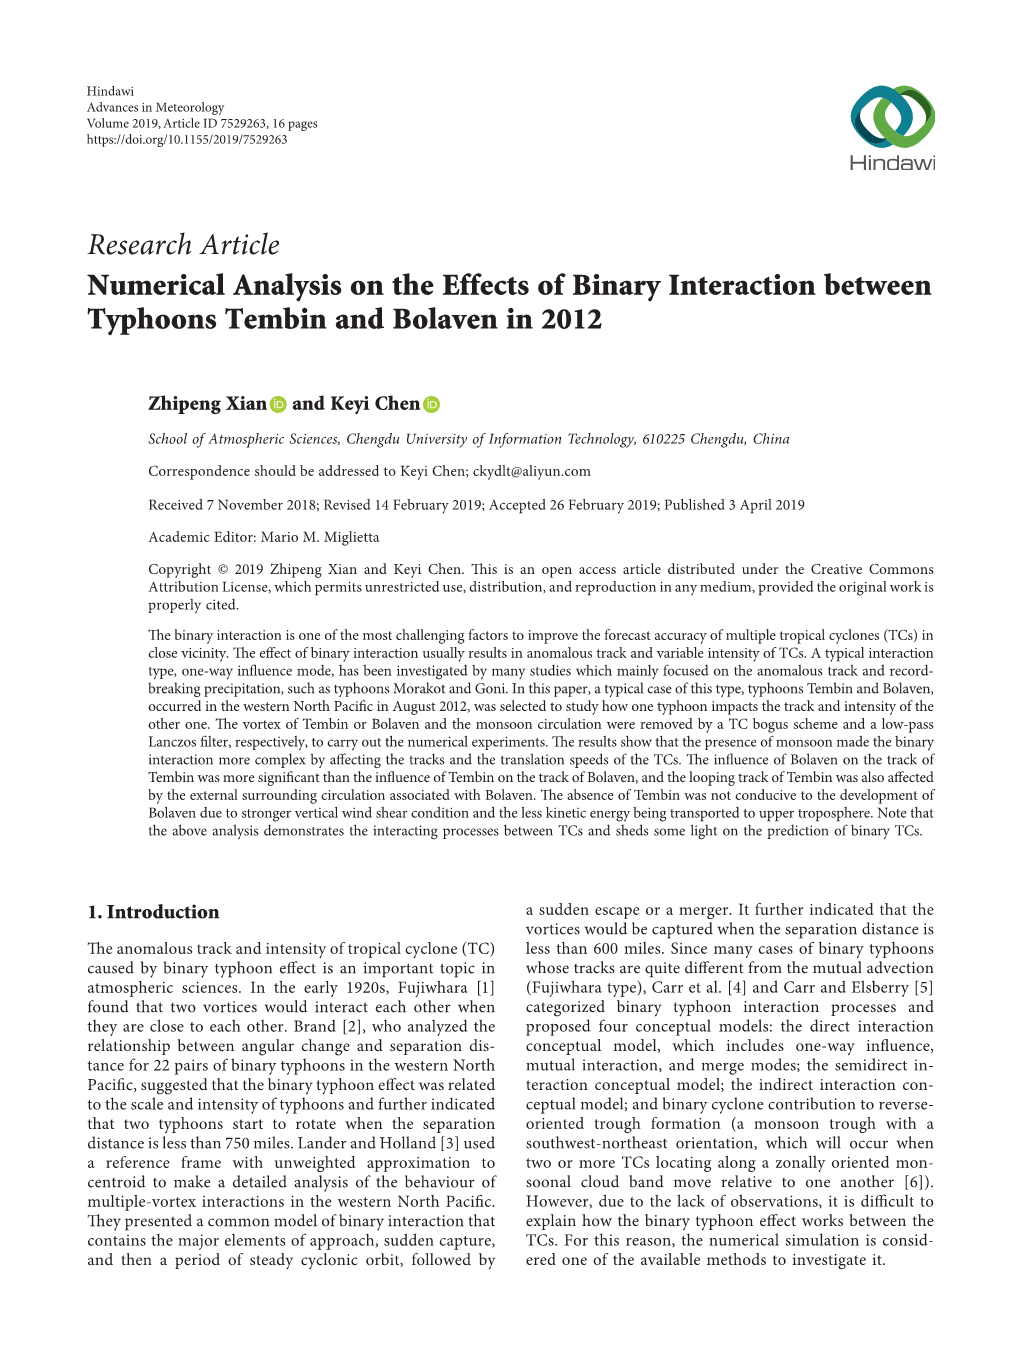 Research Article Numerical Analysis on the Effects of Binary Interaction Between Typhoons Tembin and Bolaven in 2012